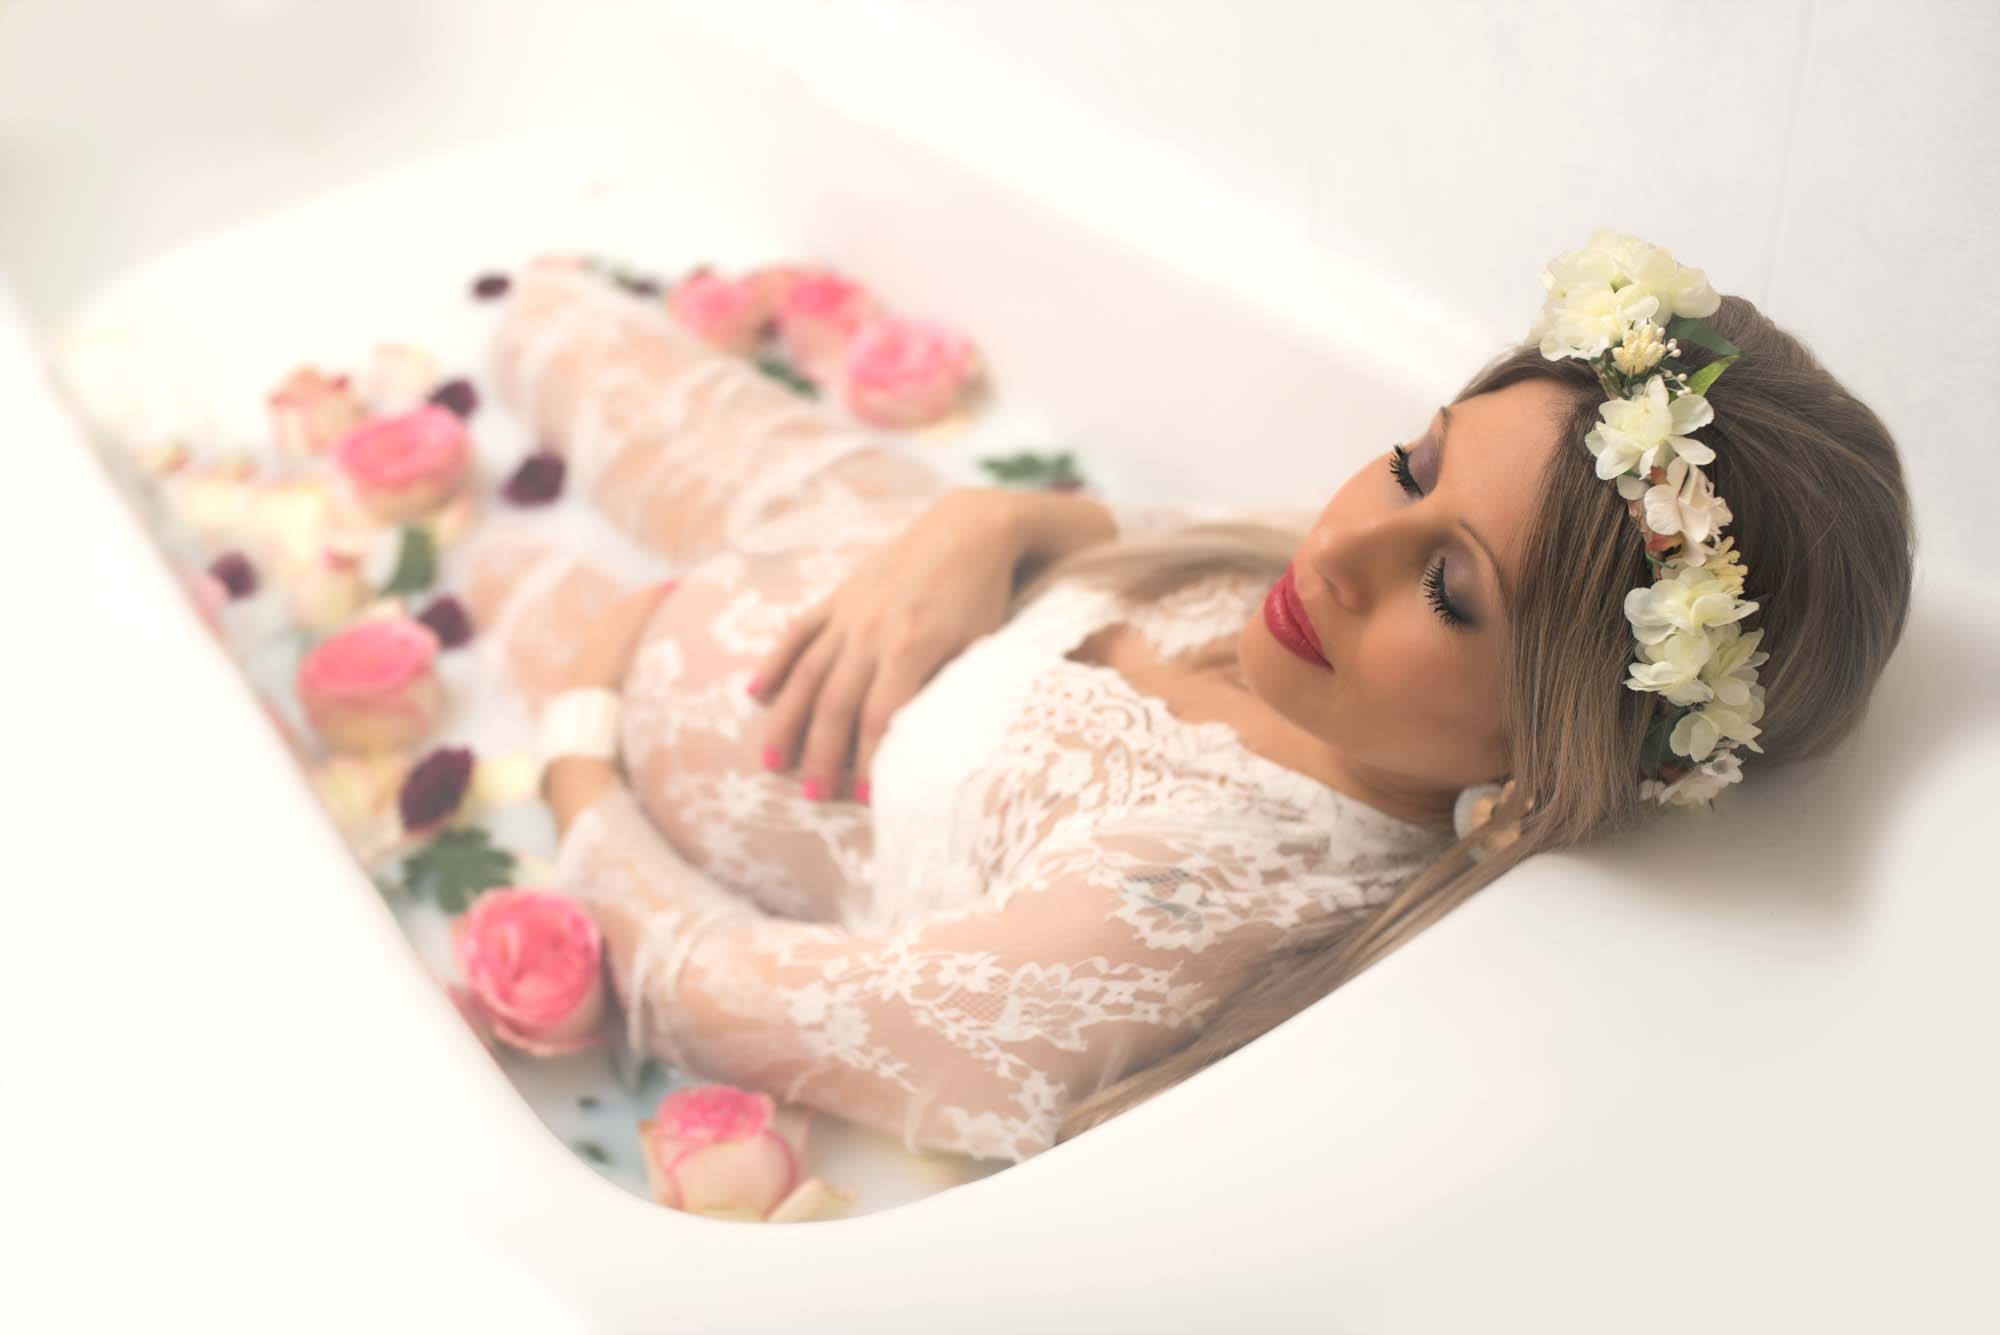 Milk bath photoshoot with pink roses to record pregnancy